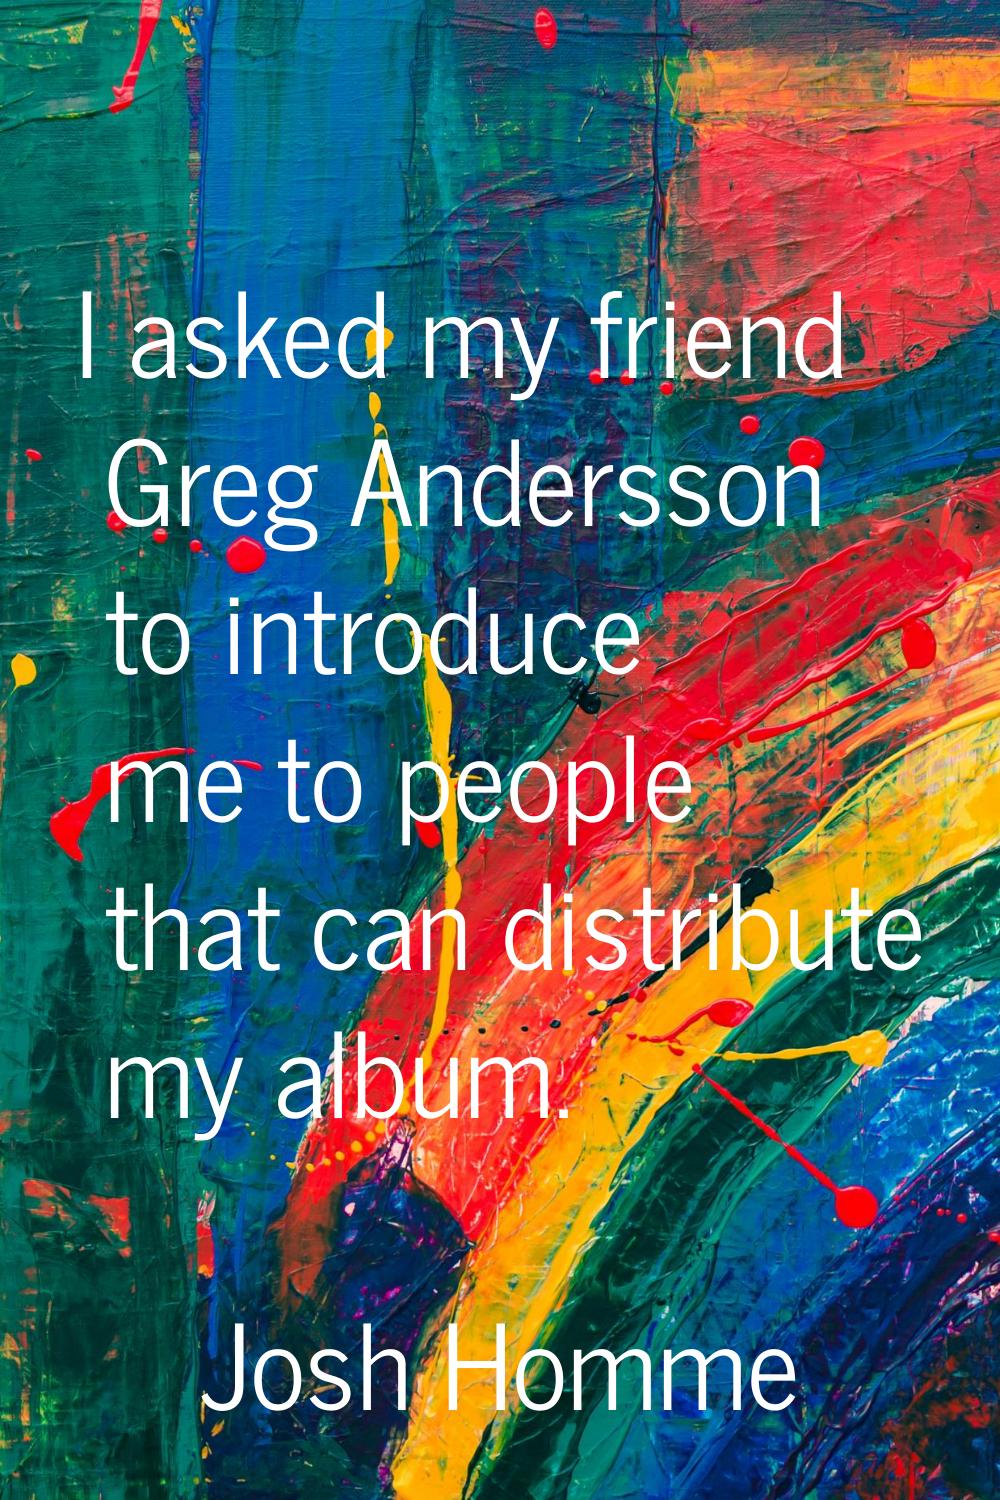 I asked my friend Greg Andersson to introduce me to people that can distribute my album.